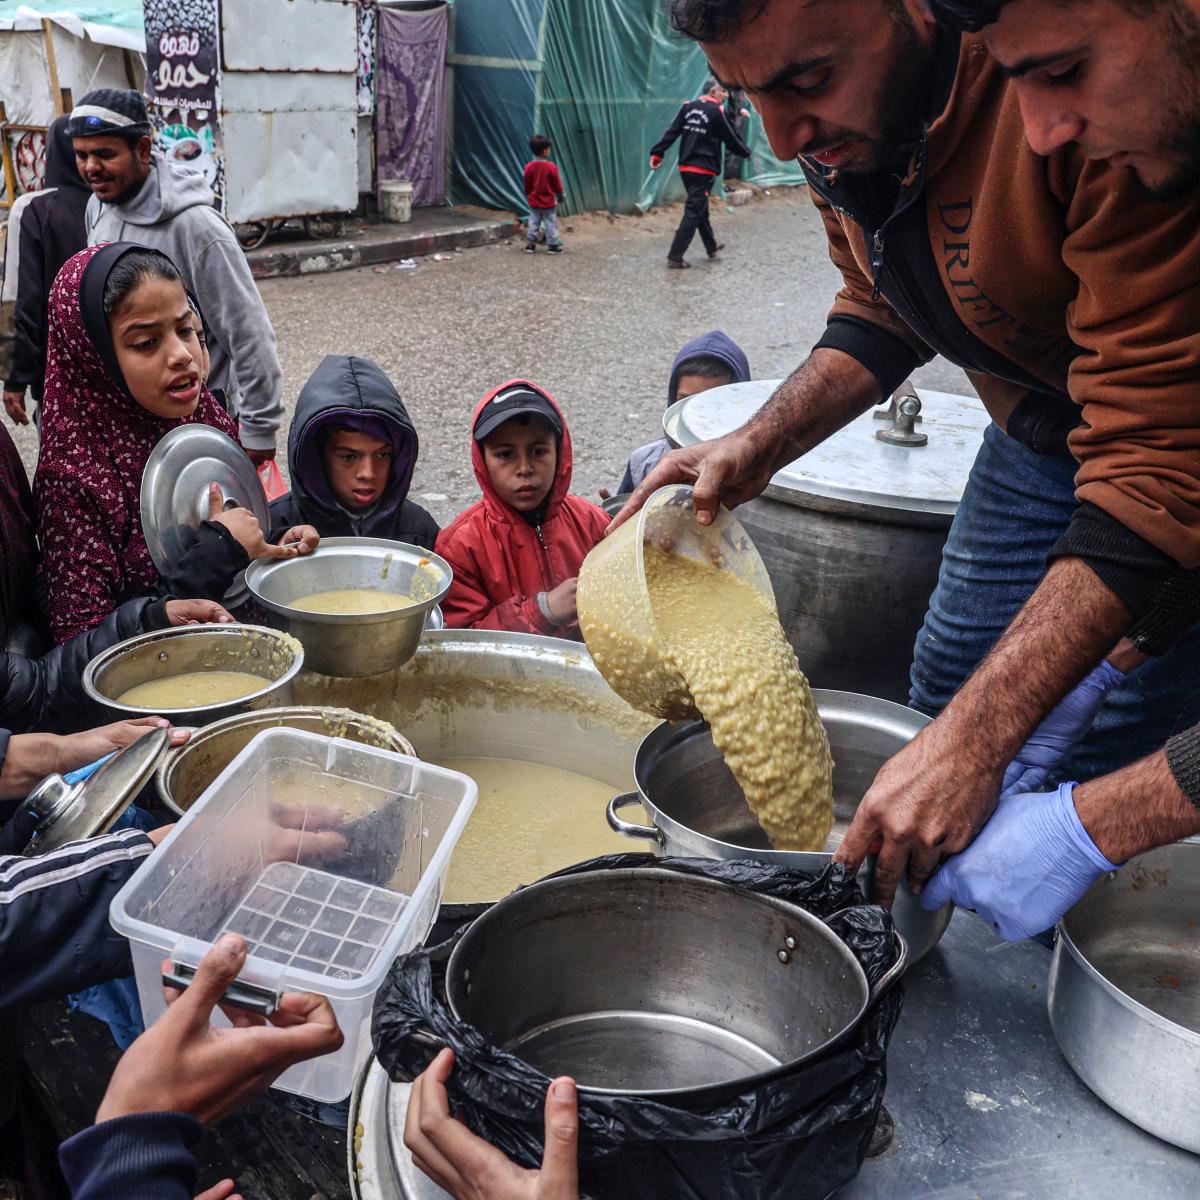 Two men pour lentils into a pot from a large vat while children circle them with their containers outreached waiting for their share.